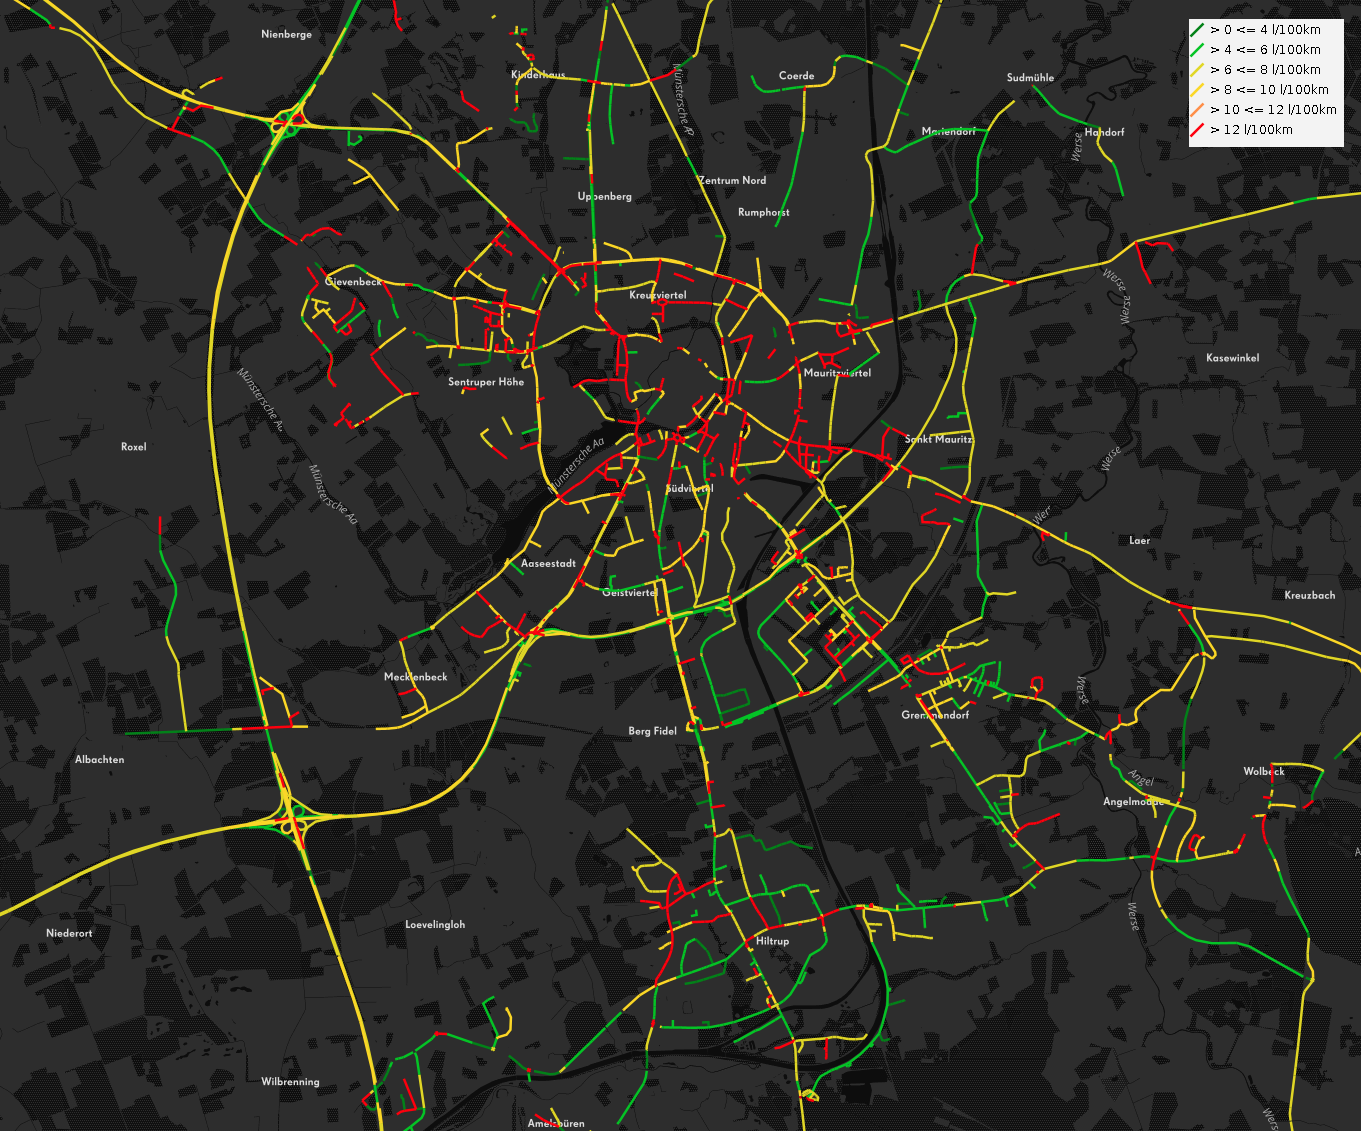 Average fuel consumption per OSM segment in the city of Münster based on open data from the enviroCar platform.